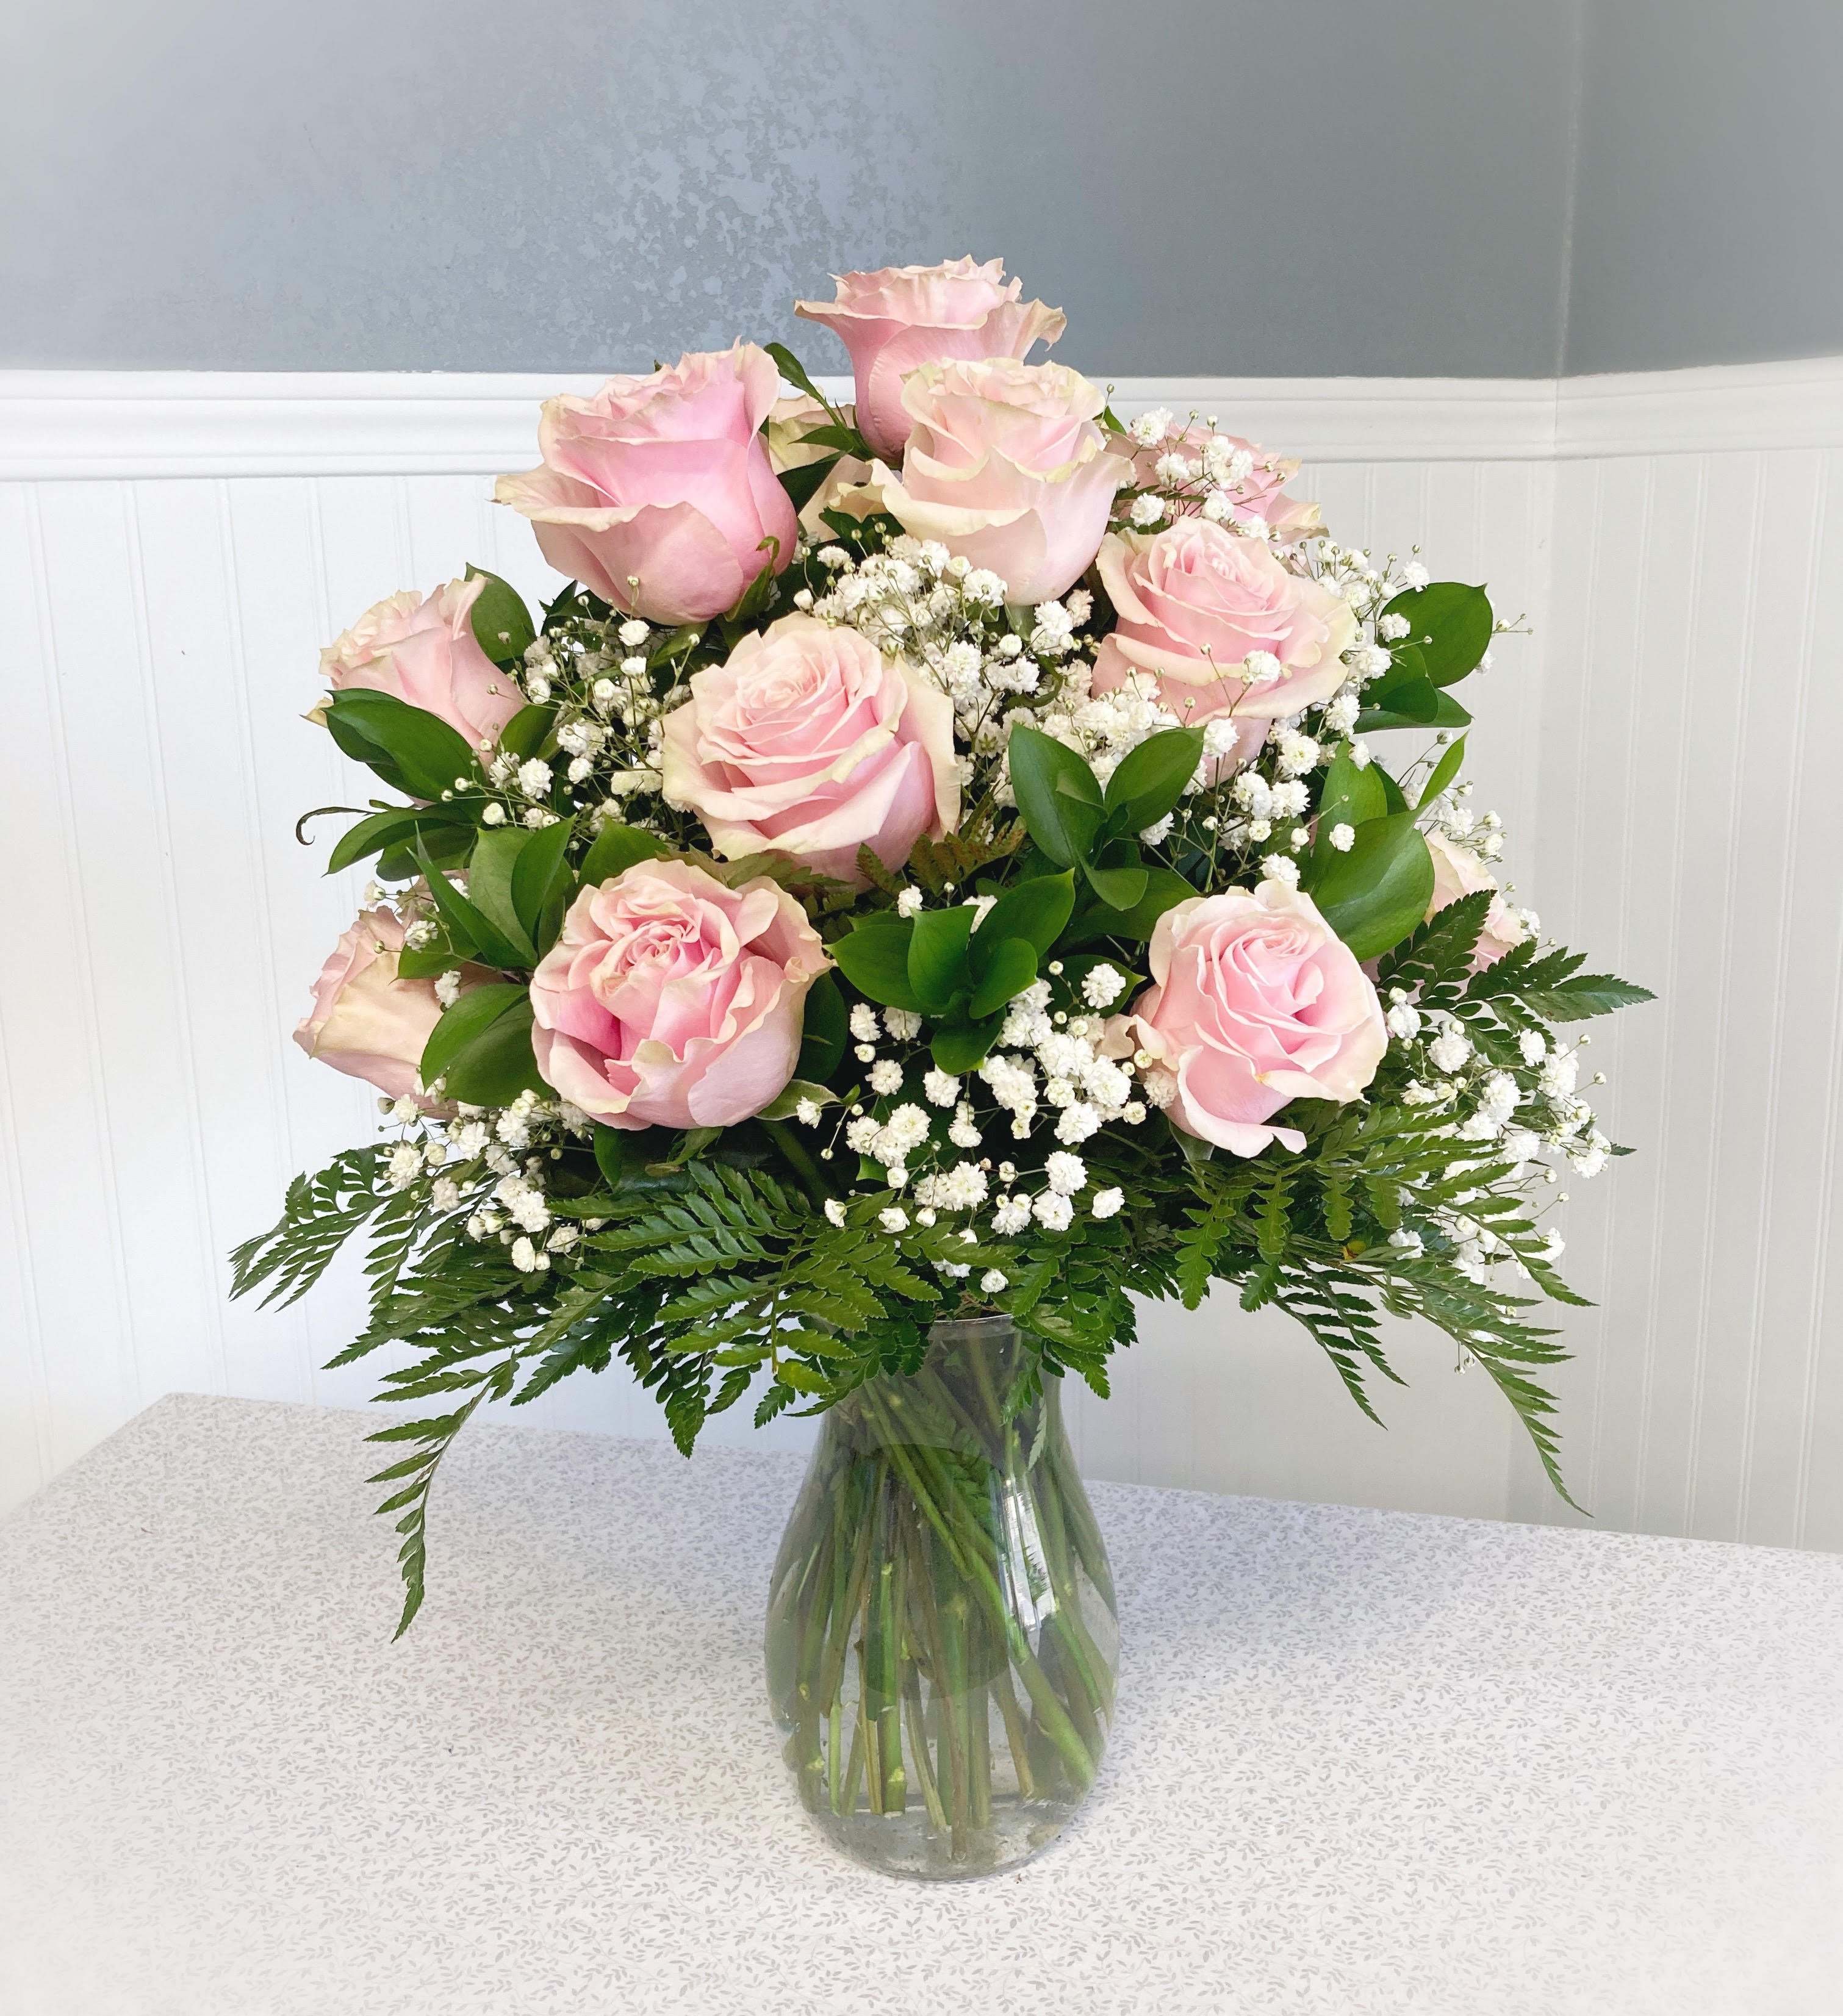 Elegant Pink Roses - Long-stem pink roses are just the gift when you want to express yourself with all the grace, sophistication and elegance they deserve--and more. Give fresh romance and passion with this beautiful, hand-crafted arrangement of premium long-stem pink roses.  Available in bouquets of 12 (standard),18 (deluxe), and 24 (premium) stems.. colors, varieties, and container may vary due to local availability